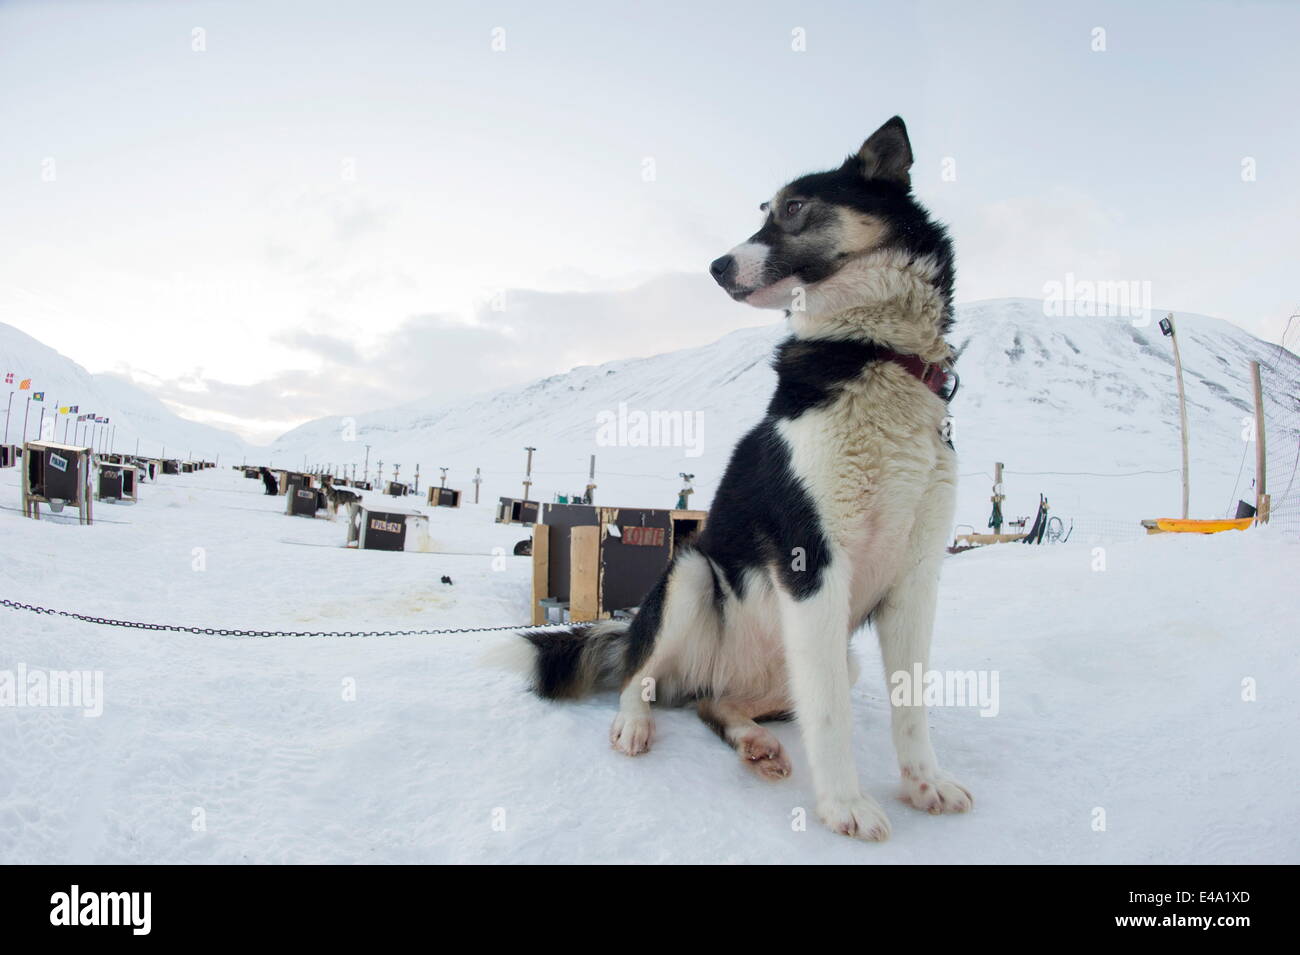 Husky dog sled operation, where each dog has its own kennel raised off the ground, Bolterdalen, Svalbard, Arctic, Norway Stock Photo